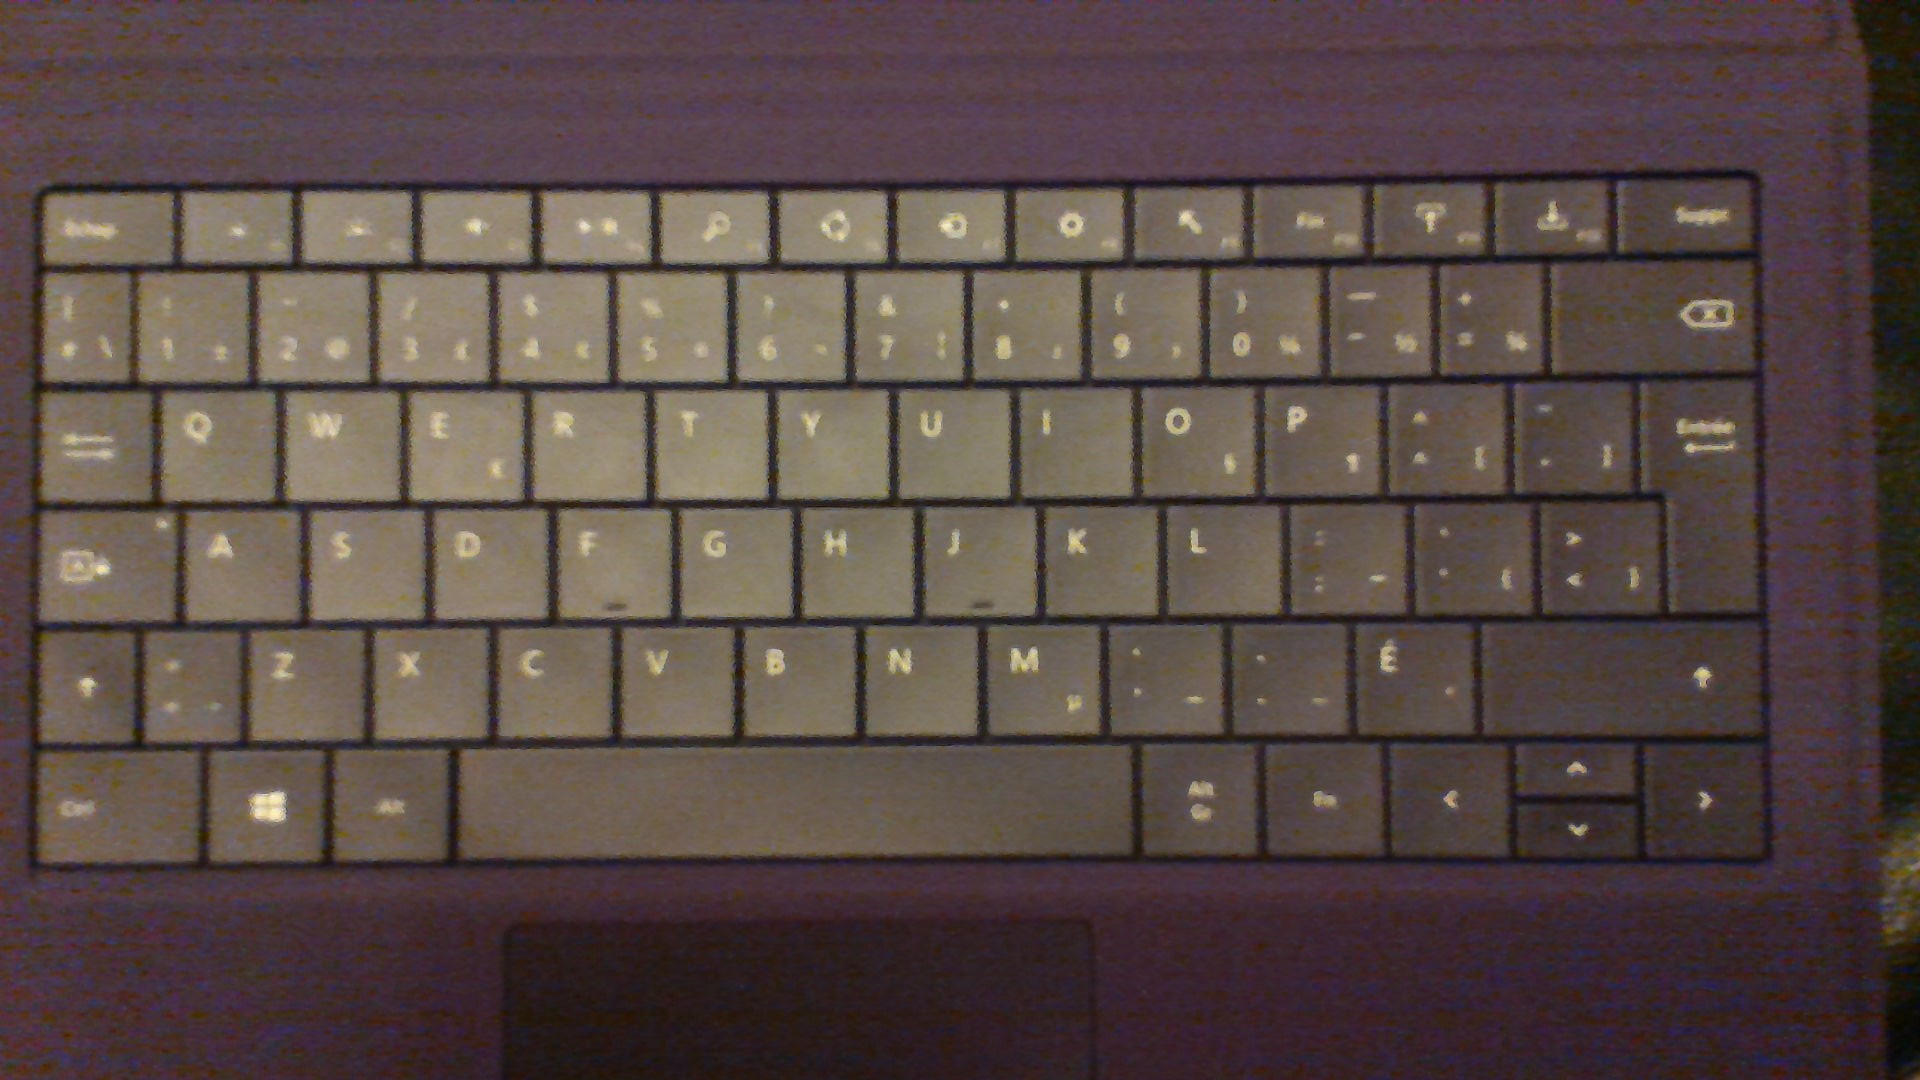 Type Cover model 1709, what keyboard layout - Microsoft Community